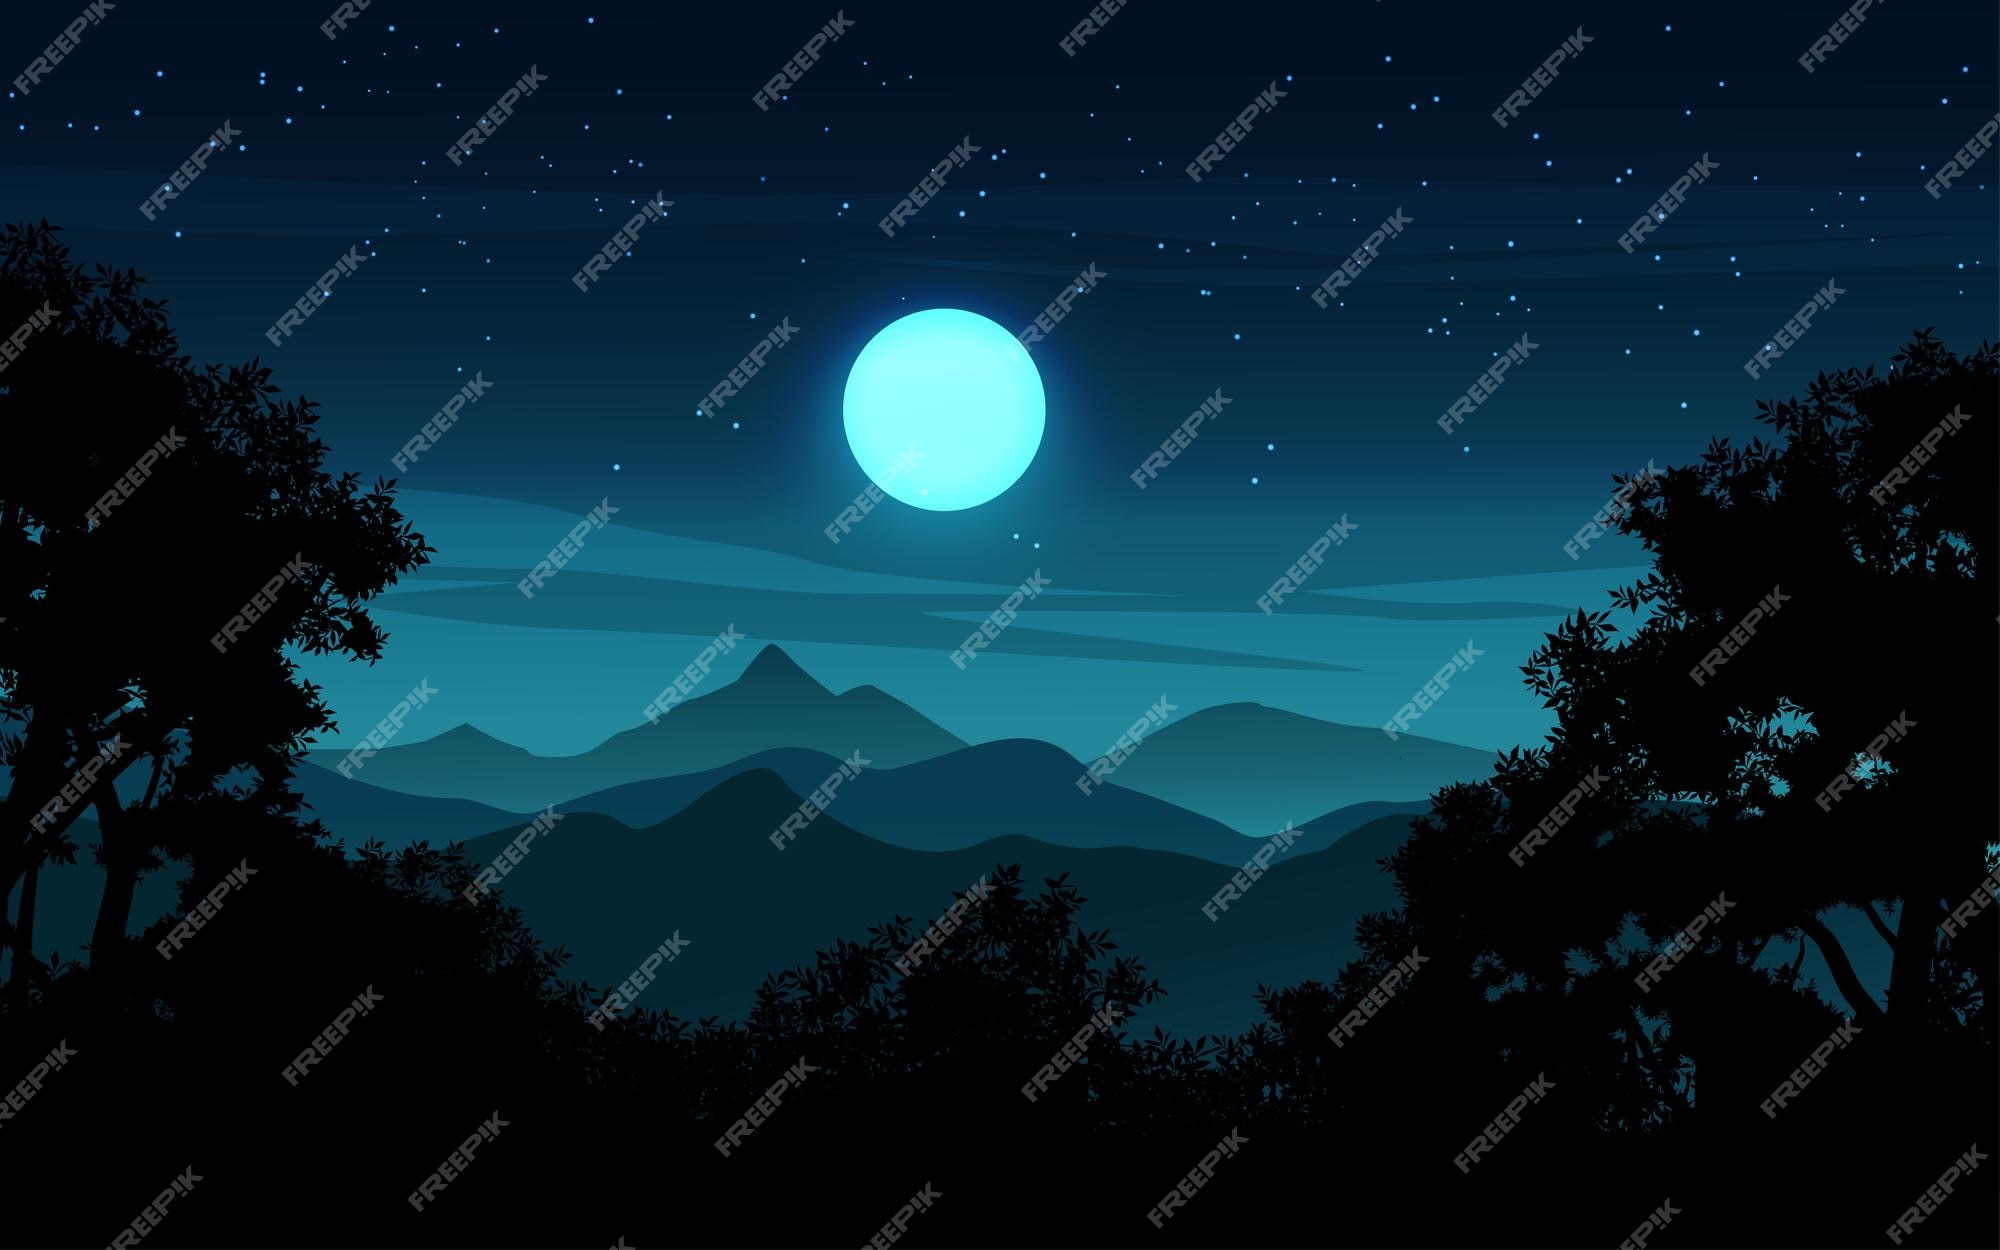 Premium Vector | Mountain dark night sky landscape with full moon and stars